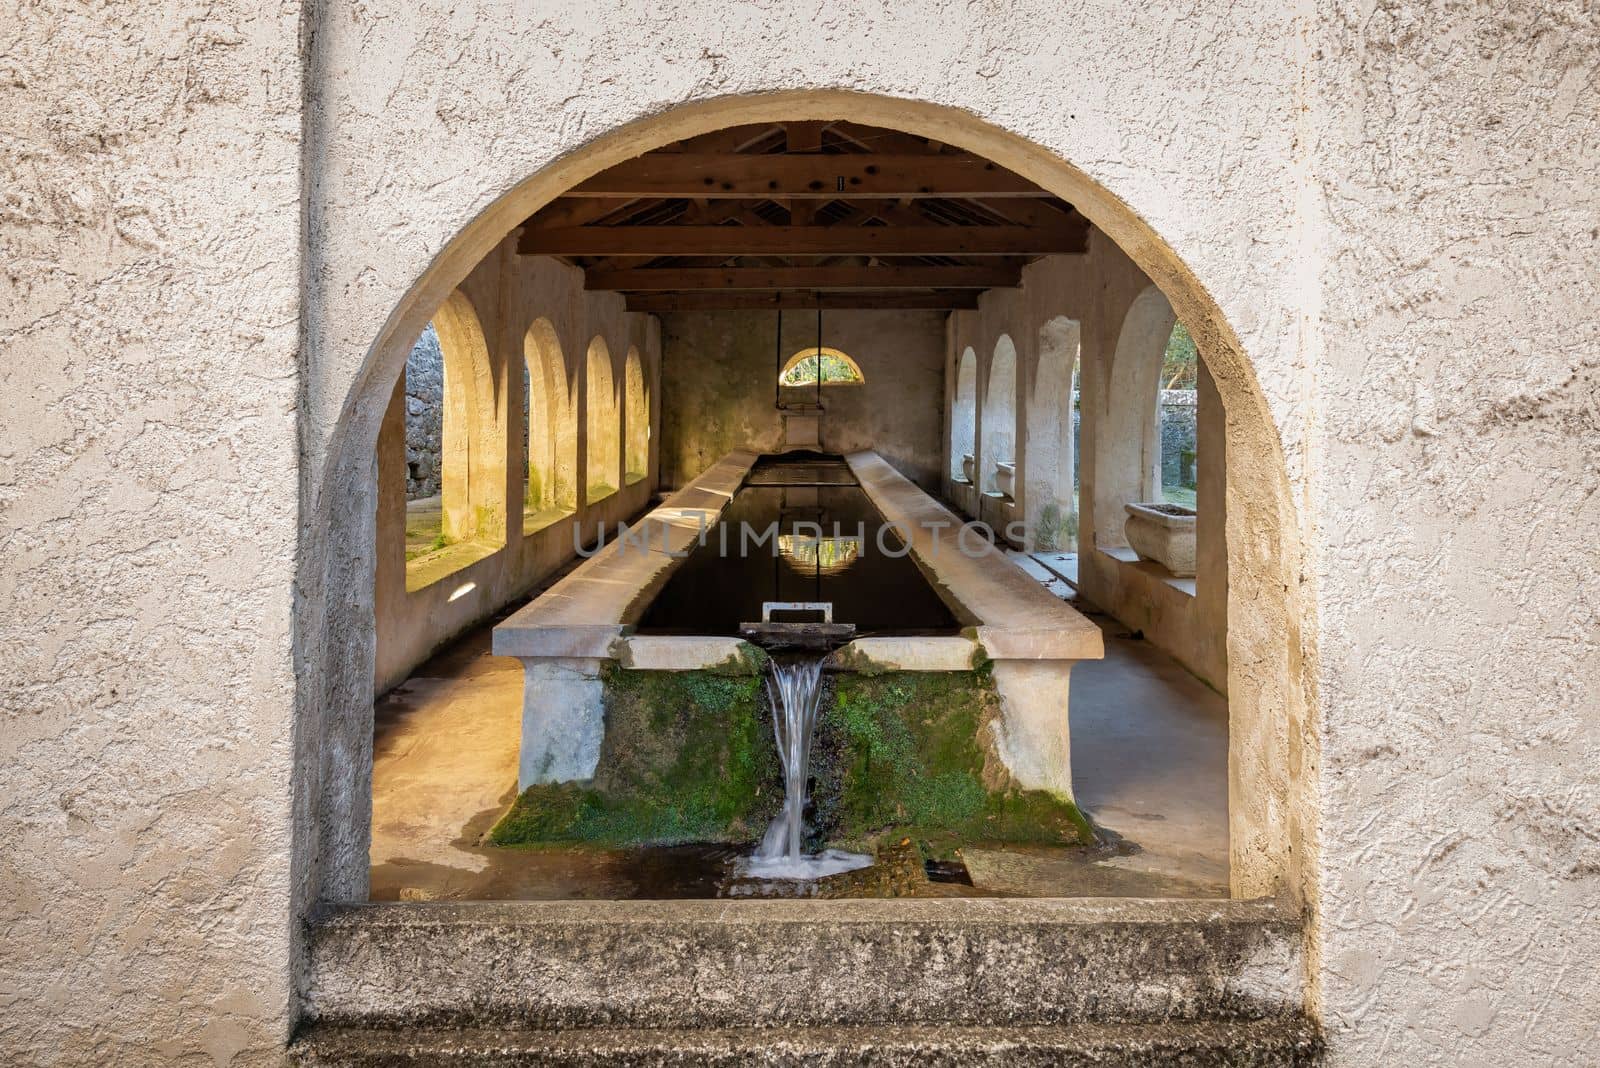 View of the washhouse in the small town of Mazaugues in the Var department, located at the eastern end of the Sainte-Baume massif, in the Provence region of France